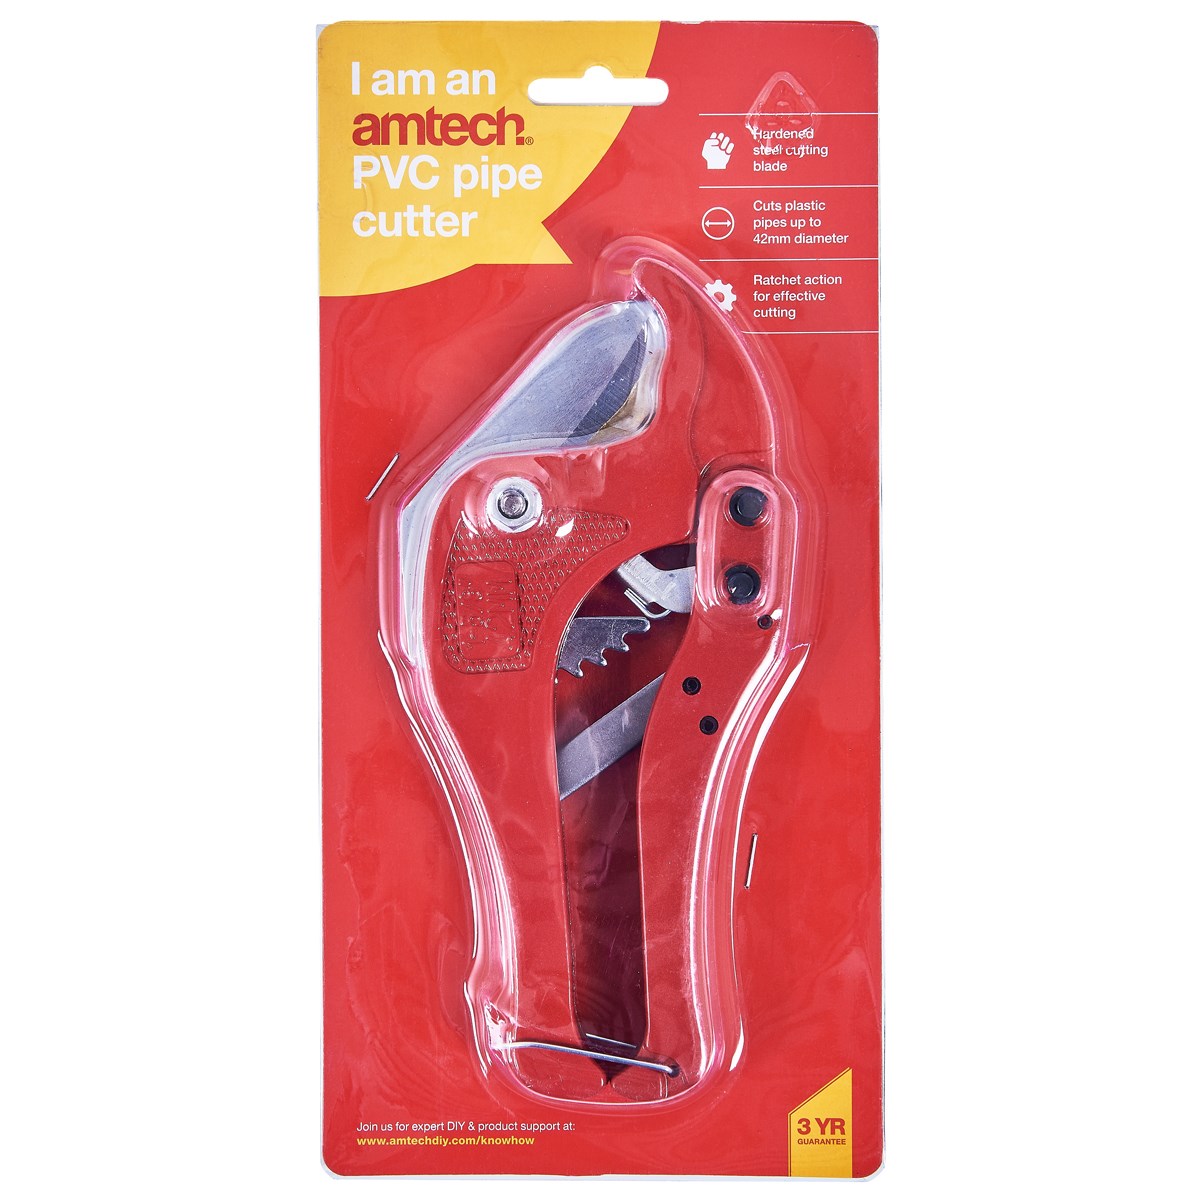 Amtech Plastic Pipe Cutter Plumbing Rigid Piping Cuts Up To 34Mm C0228 